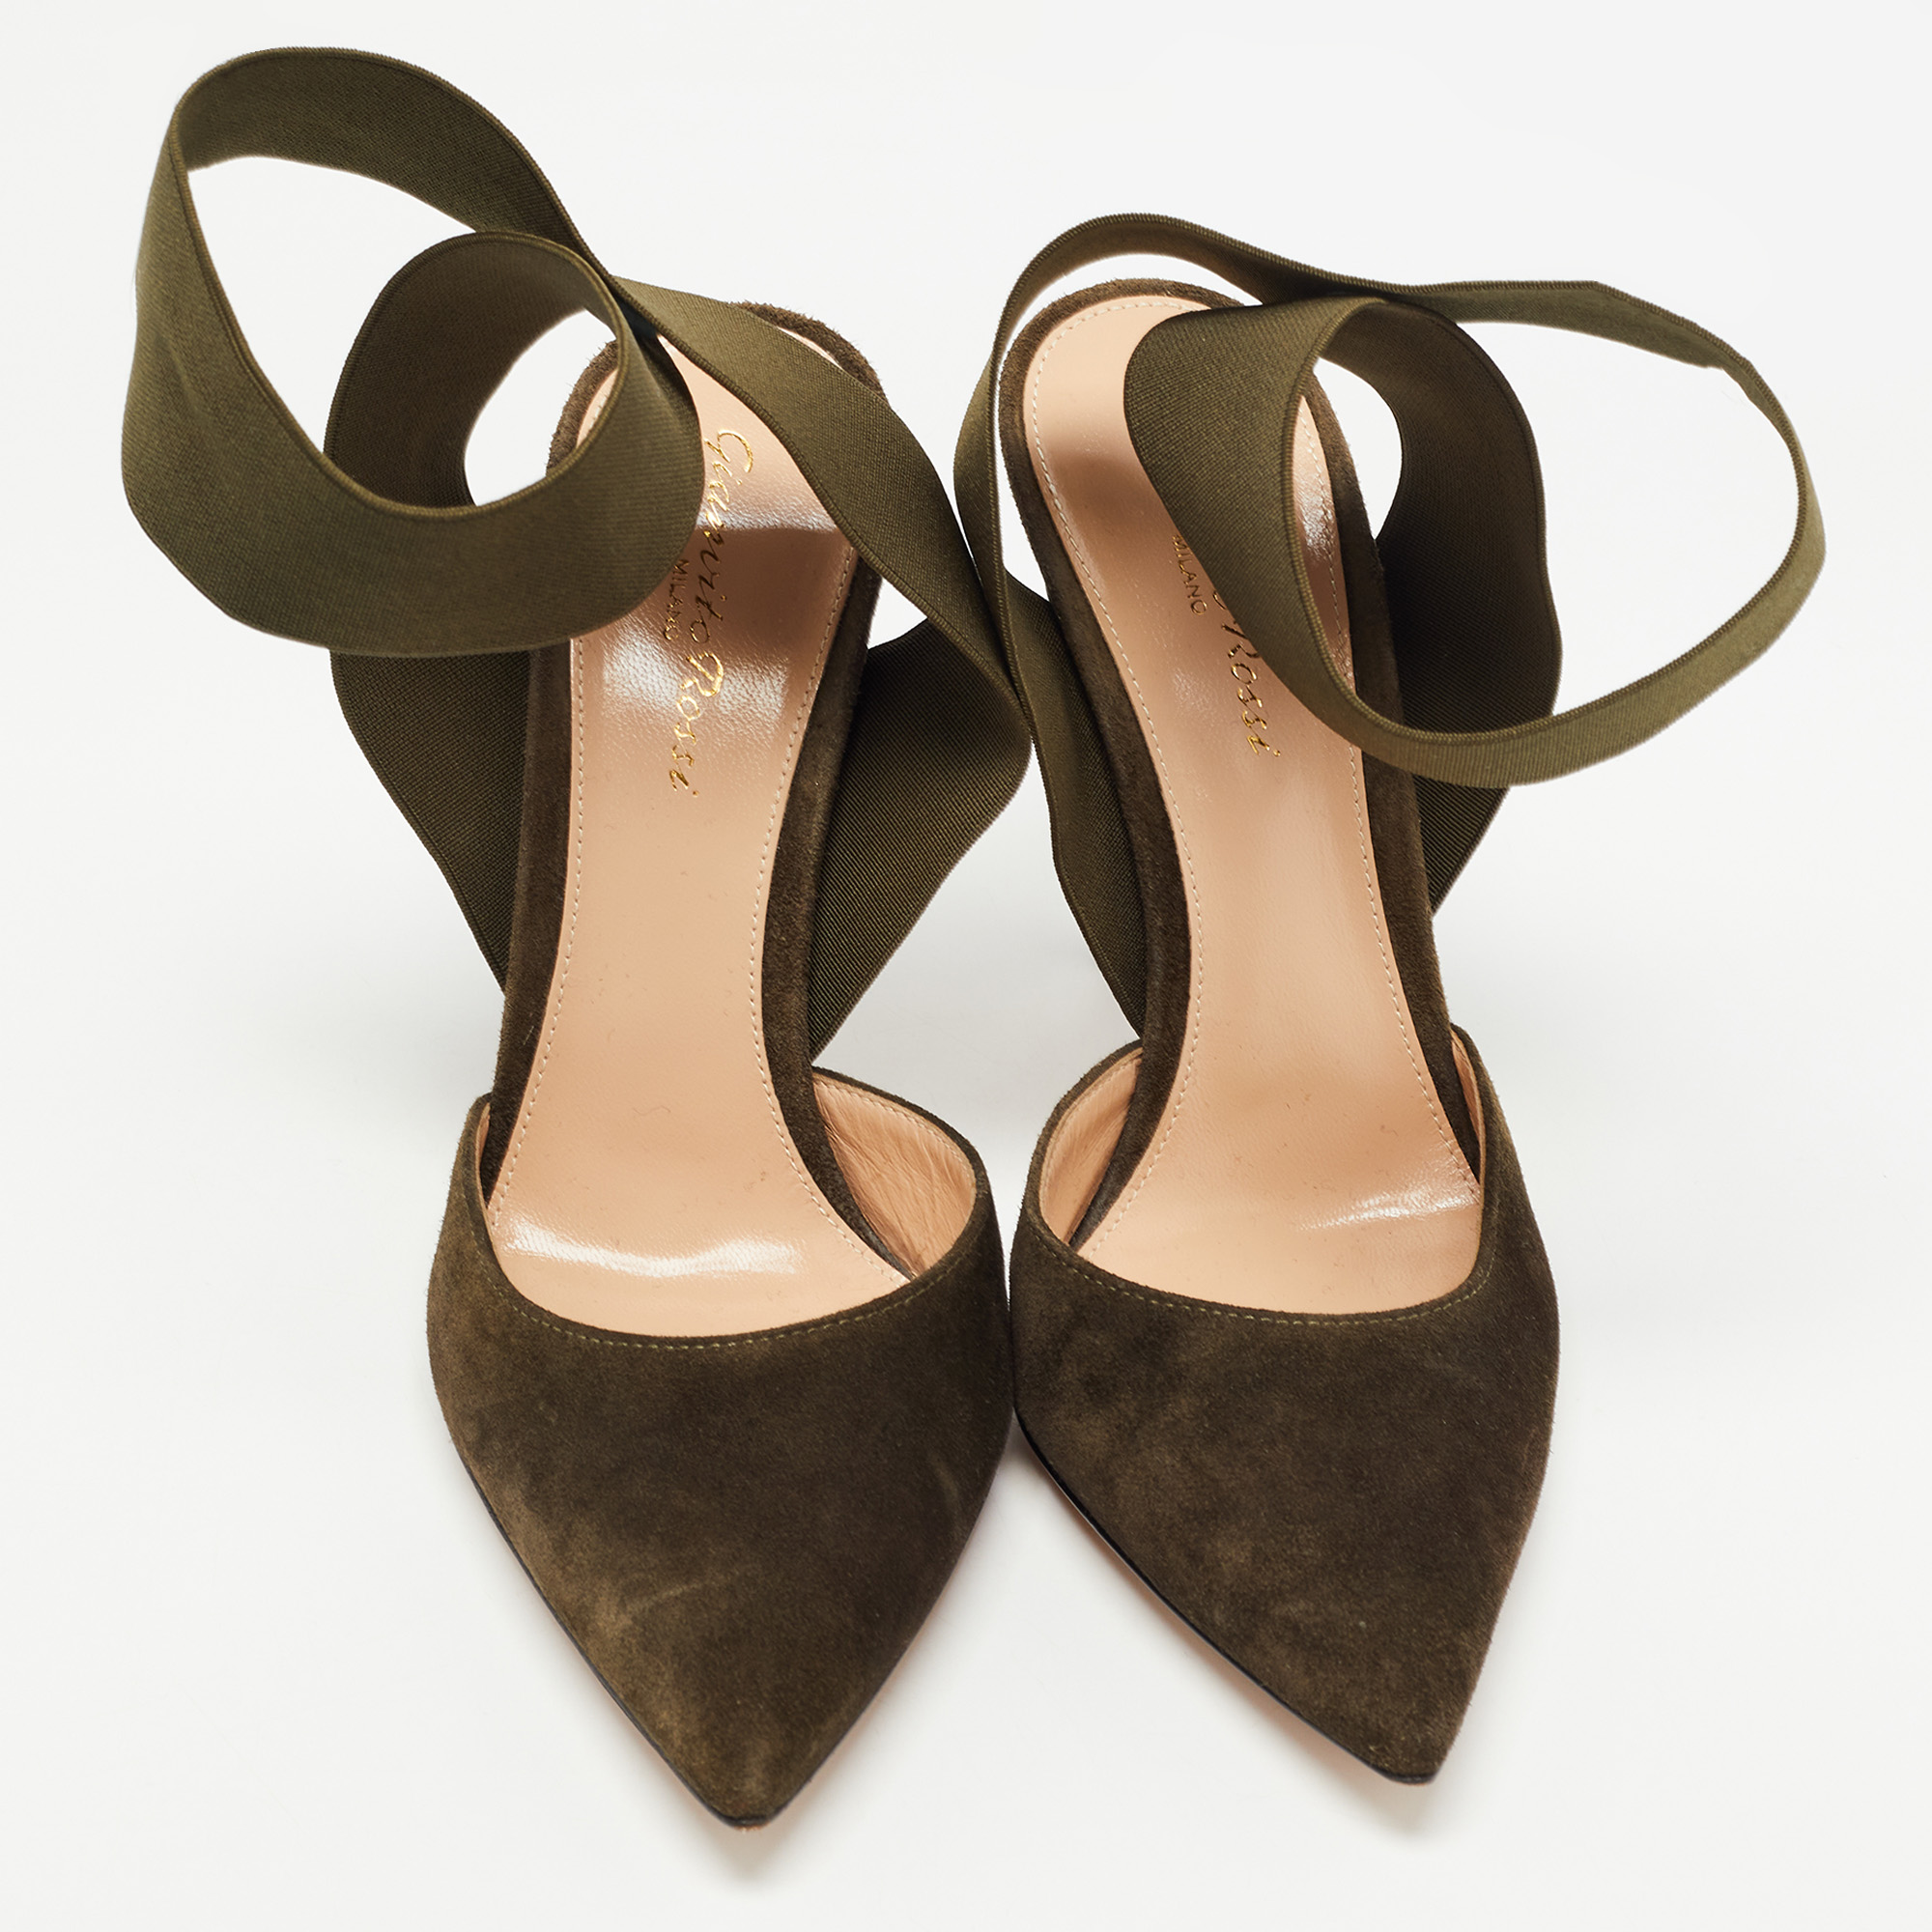 Gianvito Rossi Dark Green Suede  Pointed Ankle Wrap Sandals Size 38